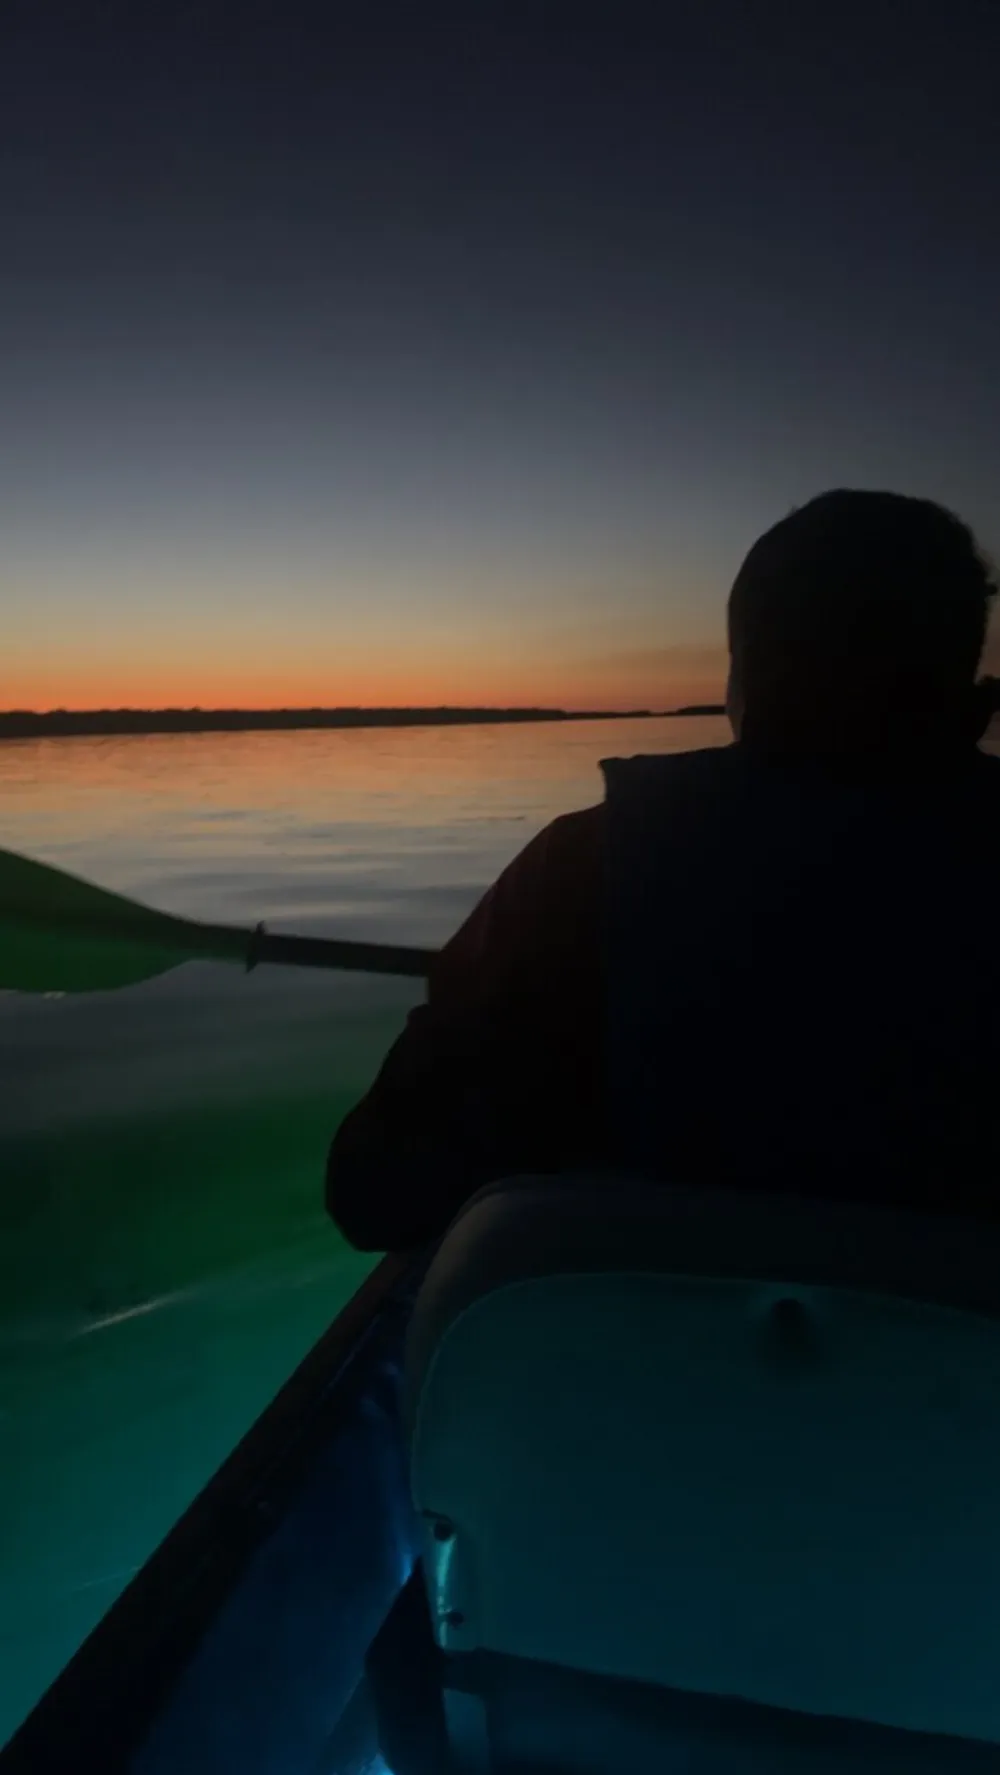 A person is seen paddling a boat at dusk silhouetted against a colorful sunset reflected on calm waters